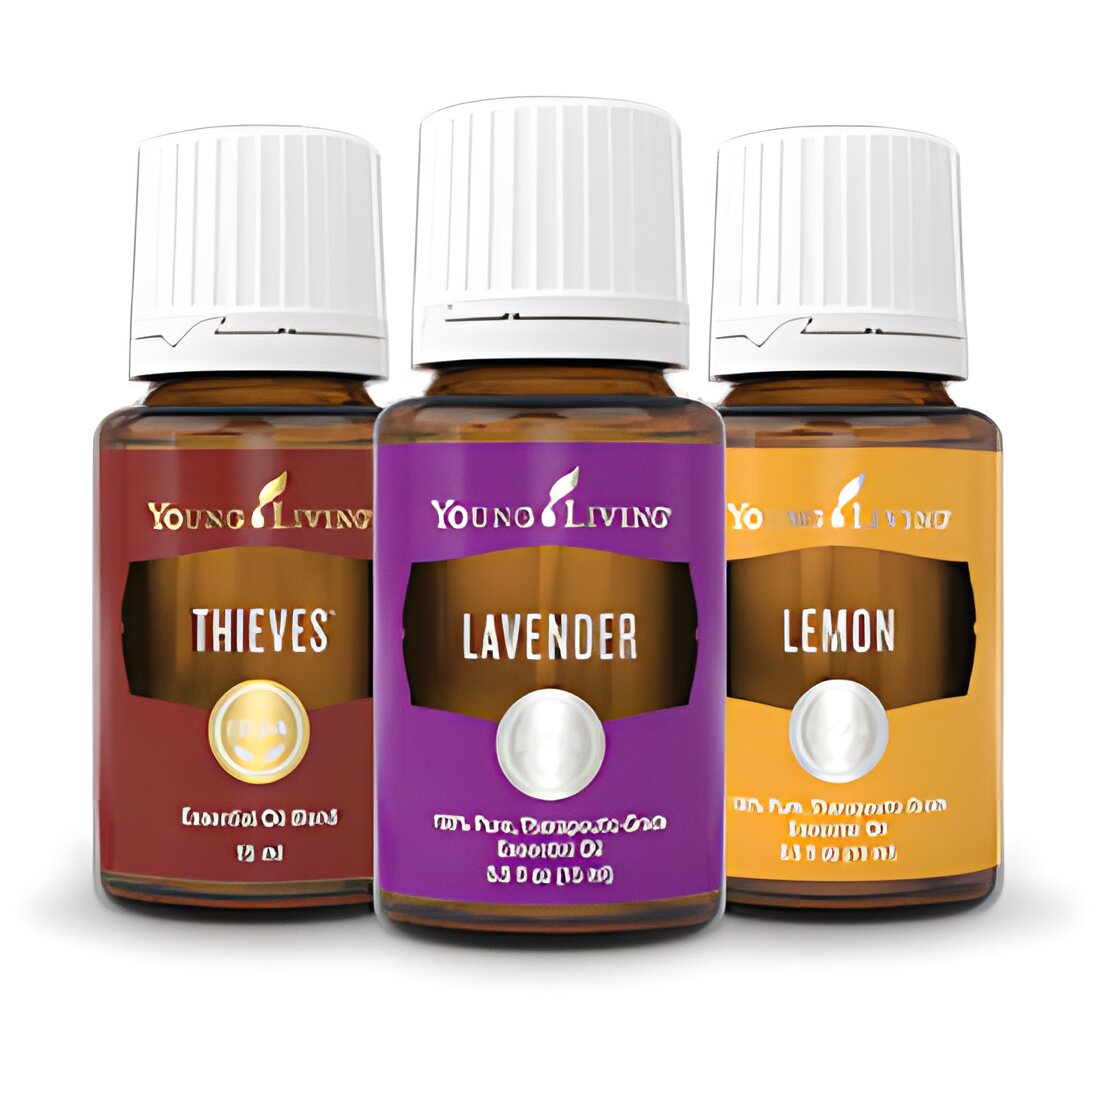 Free Samples Of Young Living Essential Oils